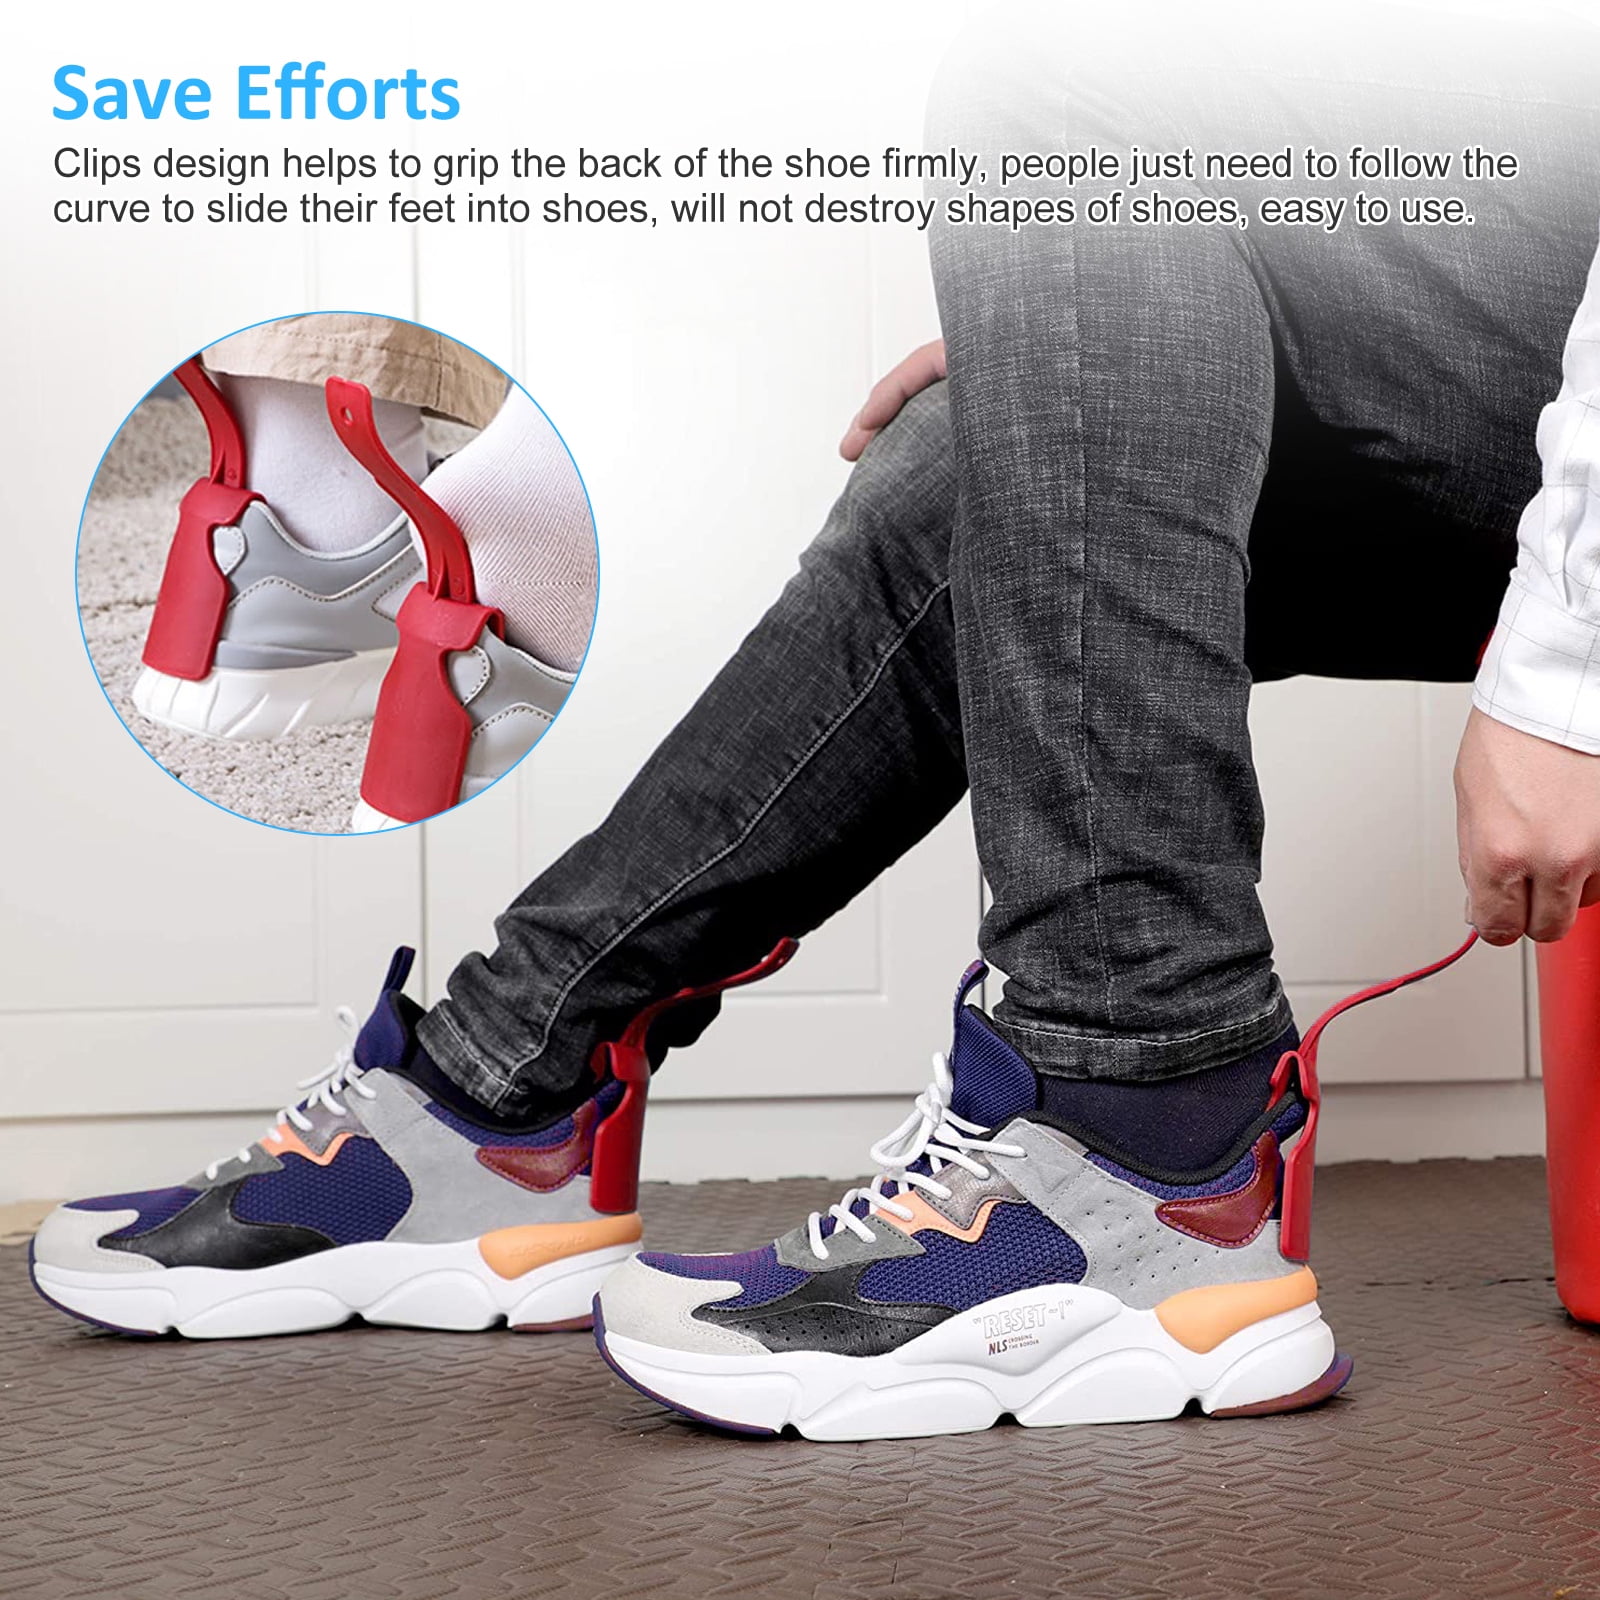 Kids Easy on & Off Shoe for Senior One Size Fits for All Shoes Pregnant Men and Women C-NineLife 2 Pcs Lazy Shoe Helper Portable Shoes Lifter Helper Shoehorns Soft PP 